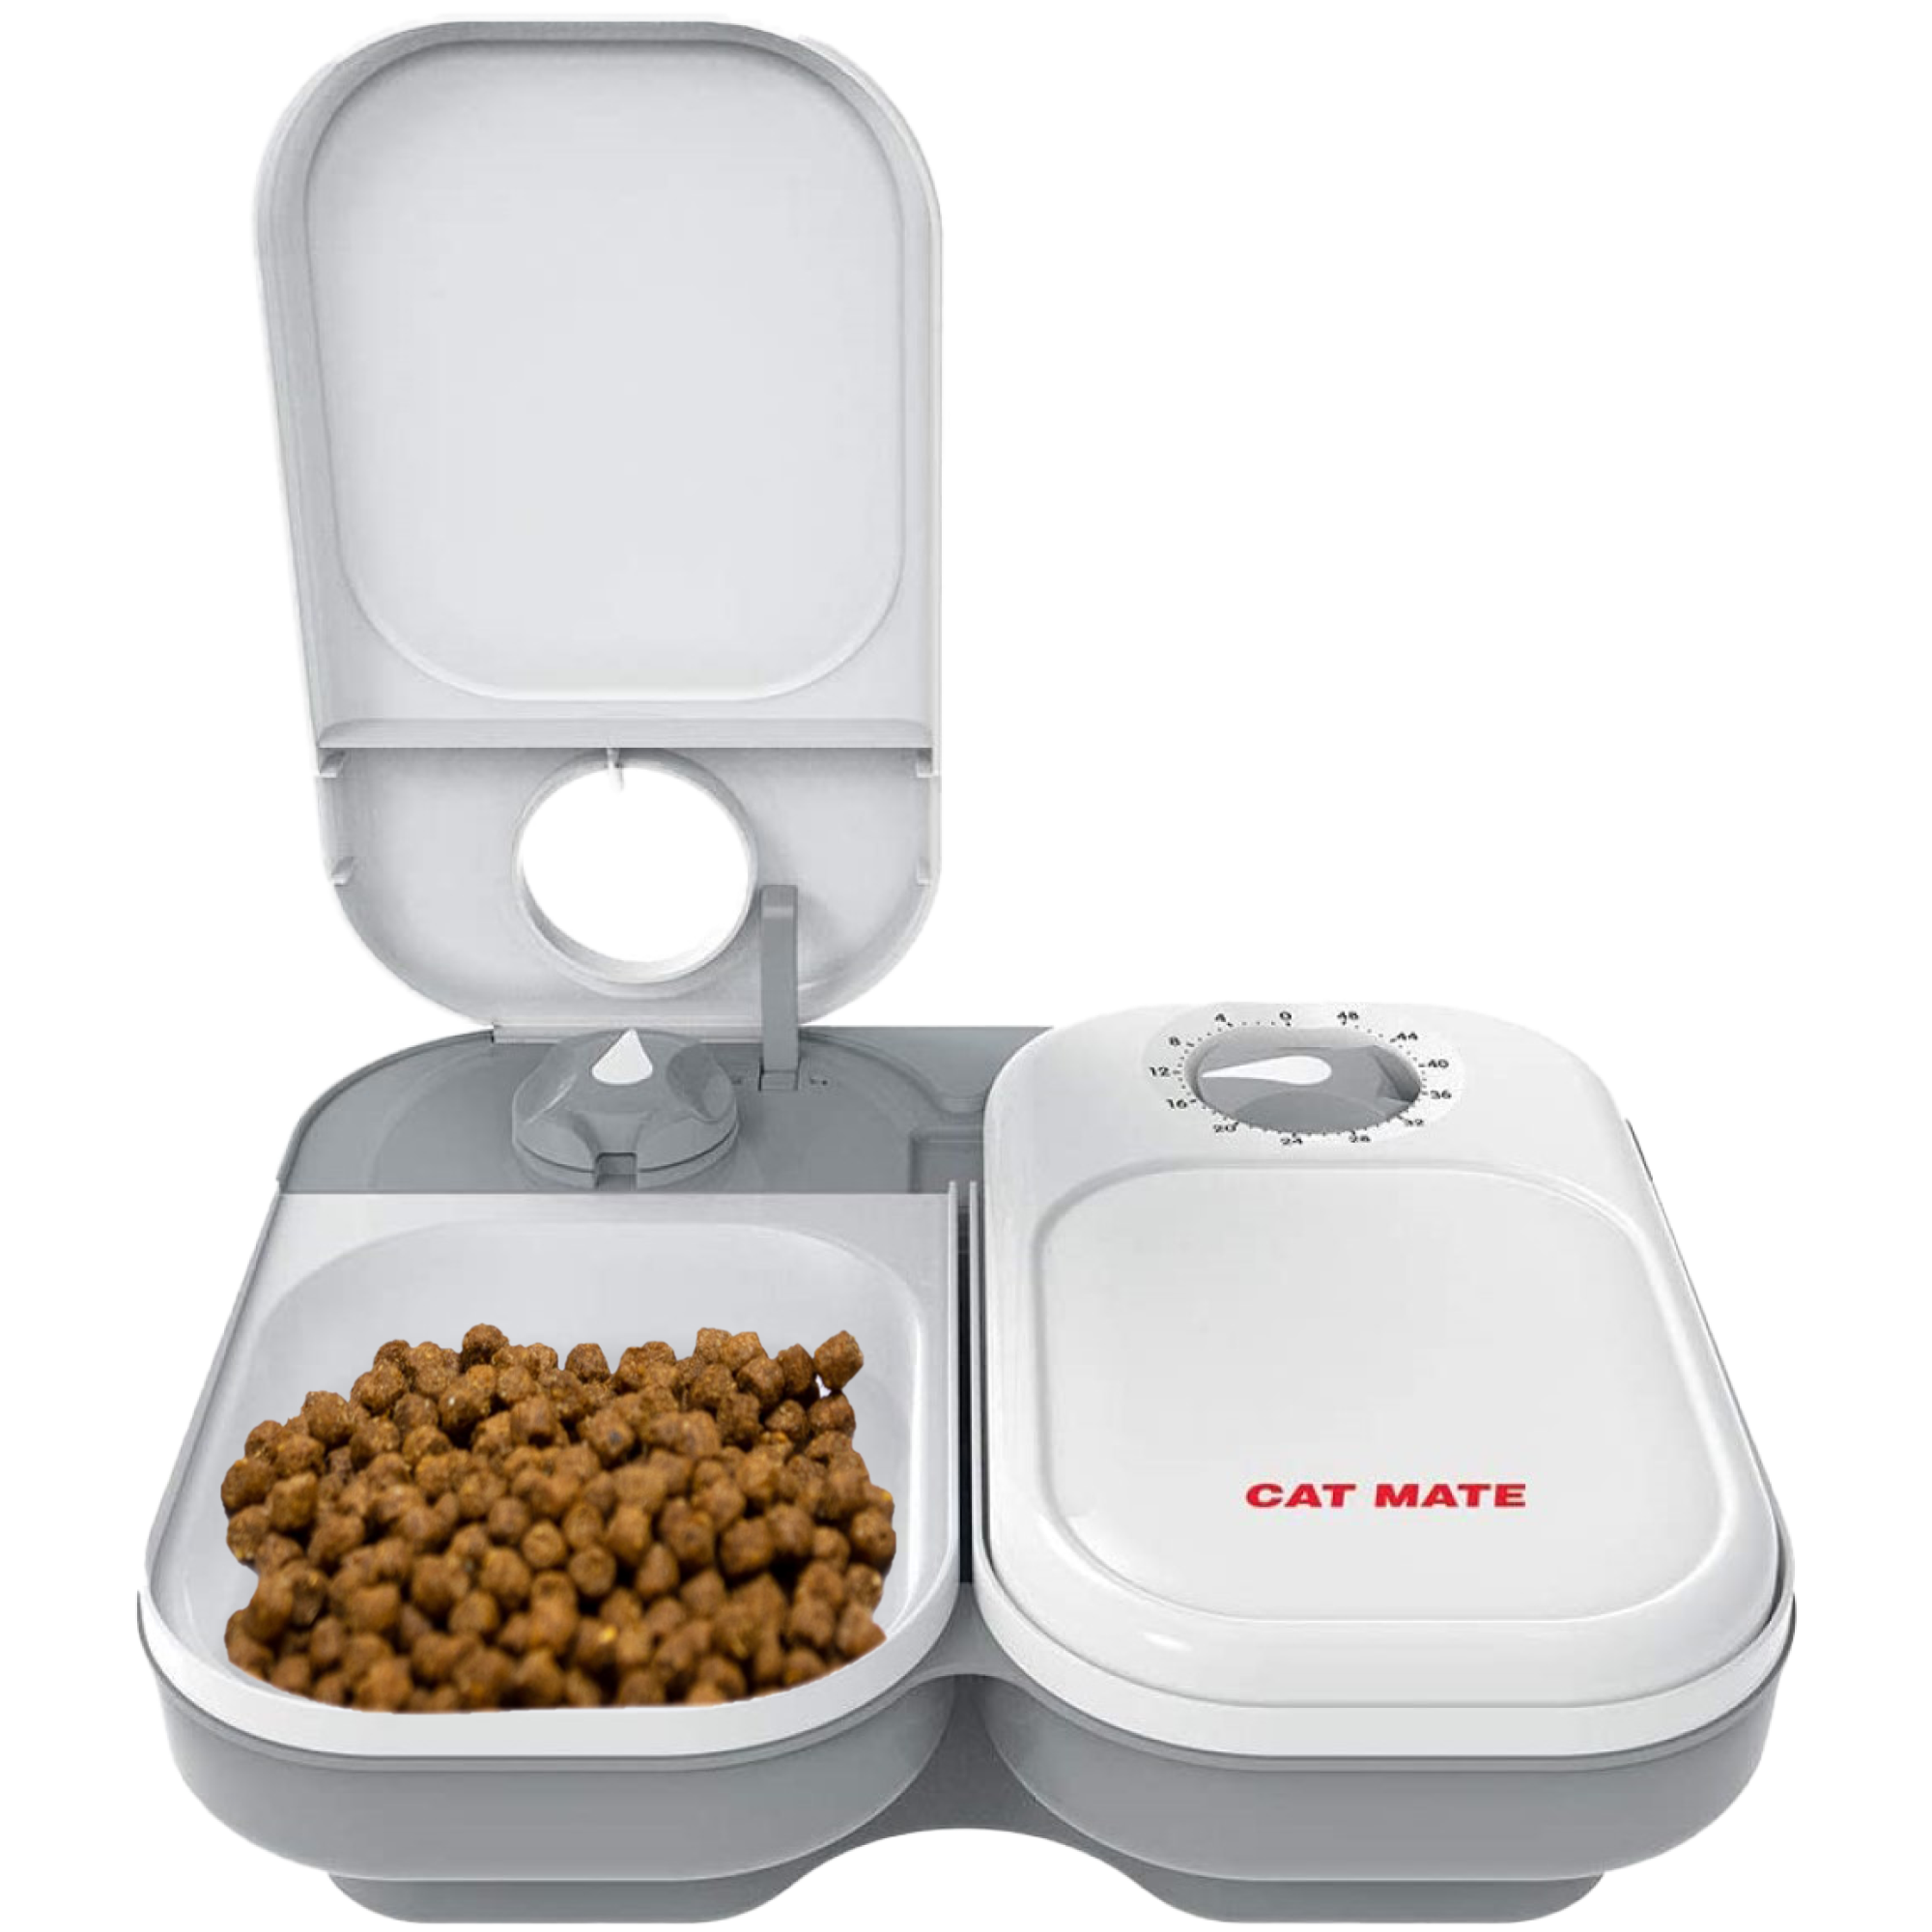 Should I Get An Automatic Pet Feeder?